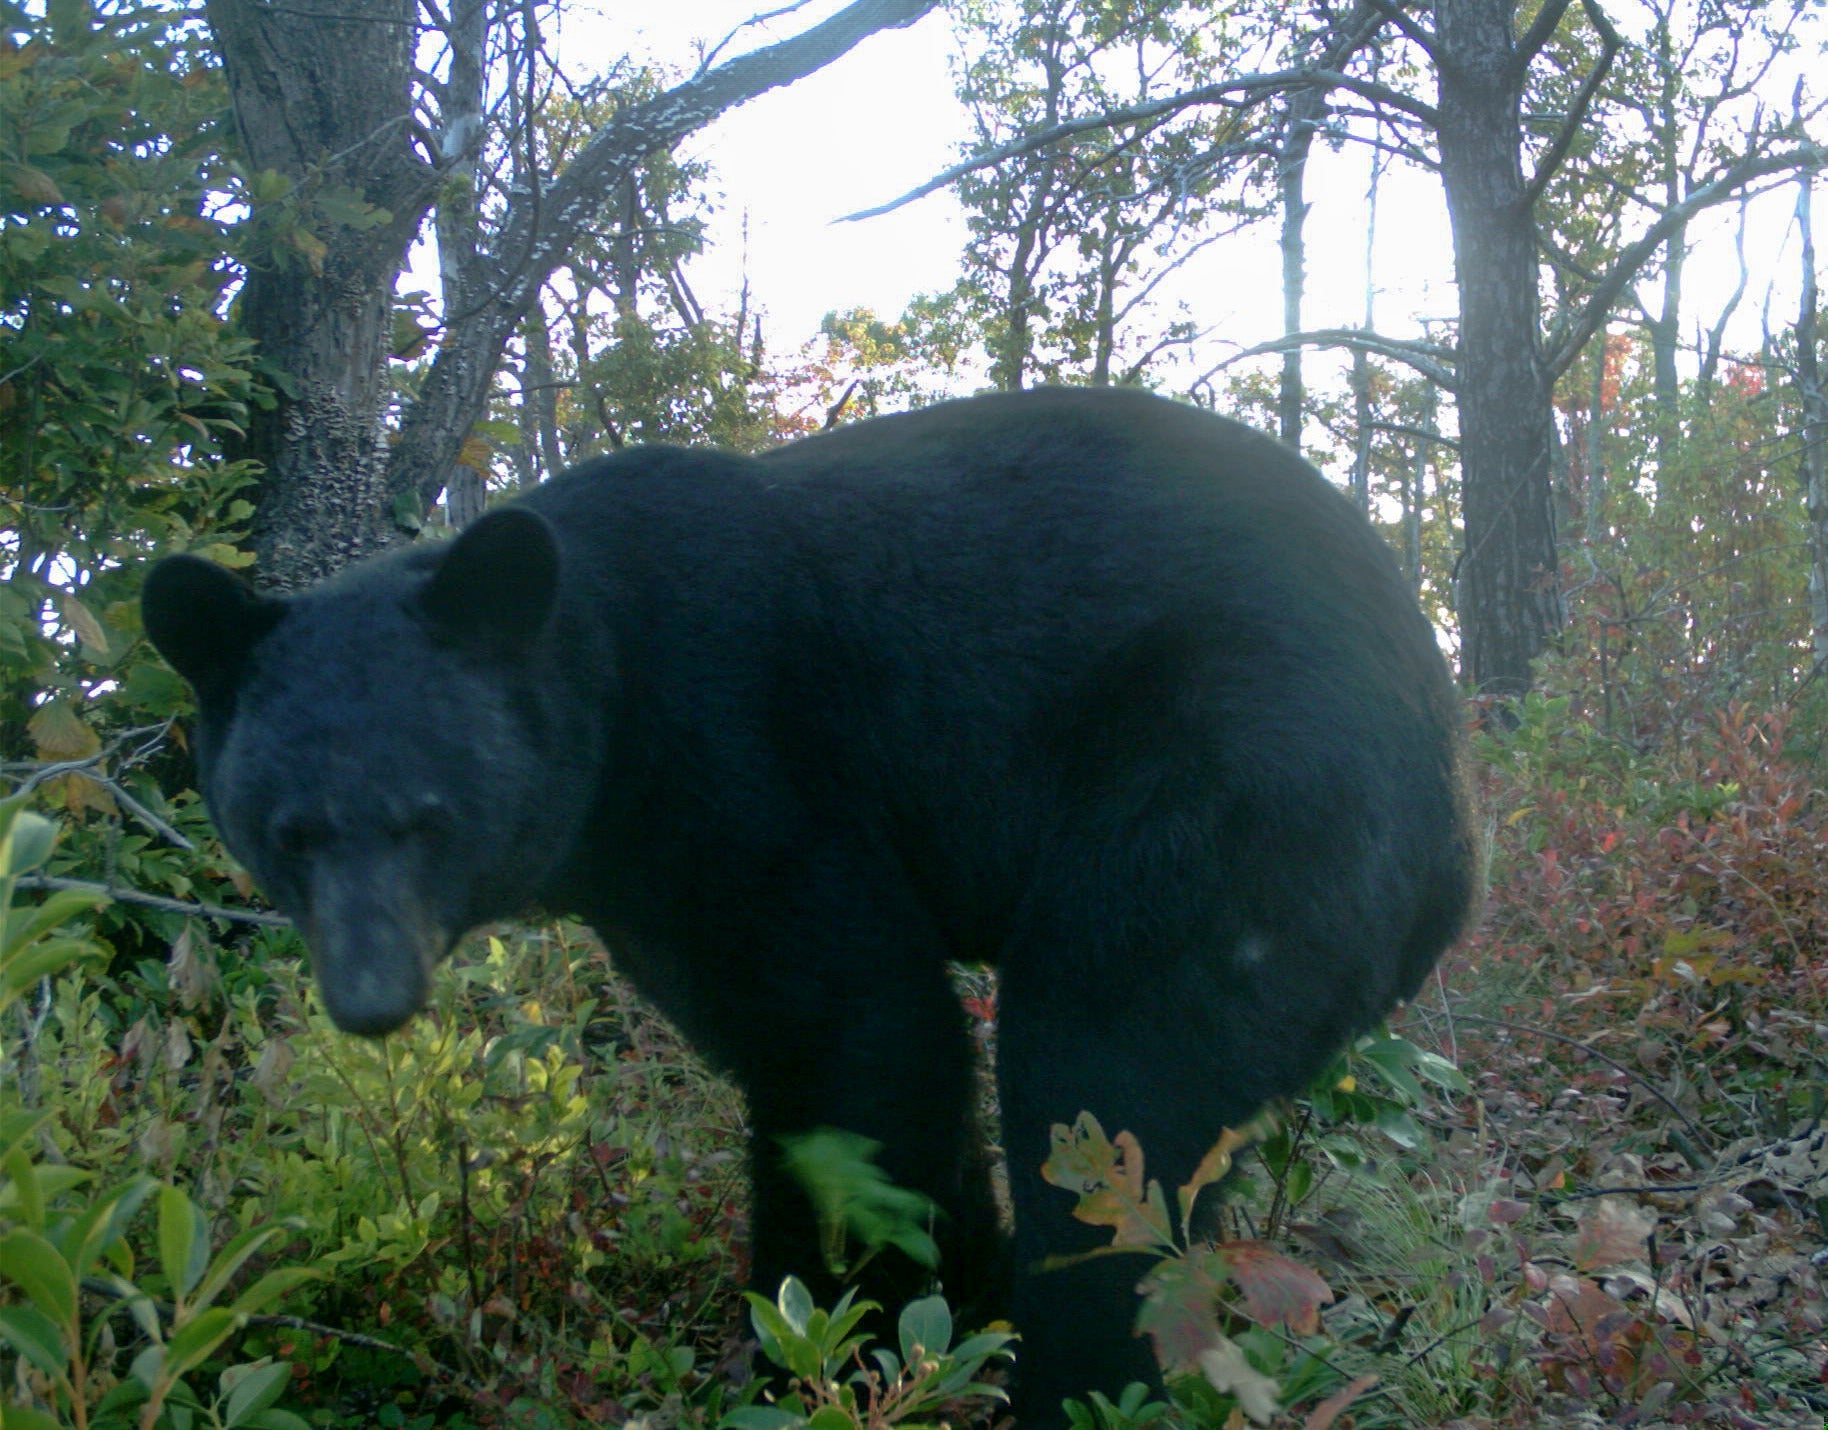 10 embarrassing animal photos captured by camera traps | Popular Science